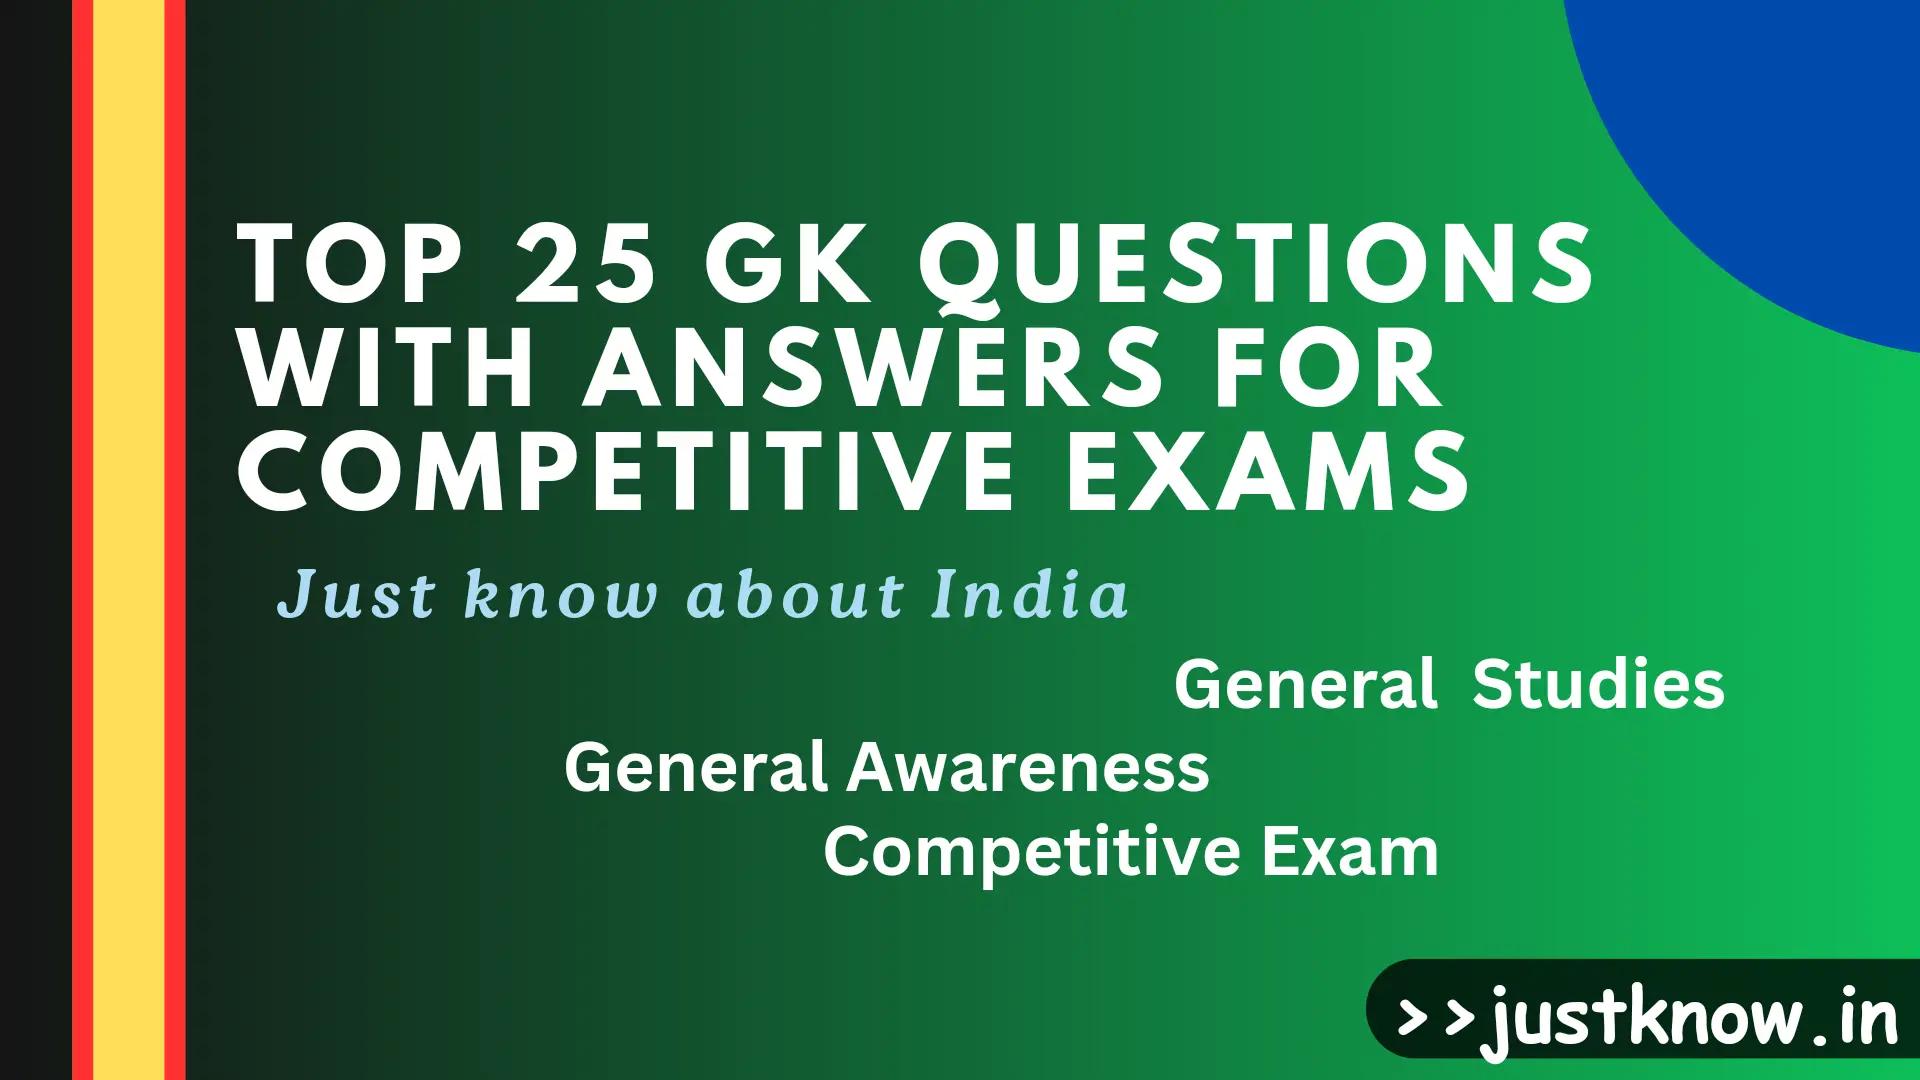 Top 25 General Knowledge Questions With Answers in English